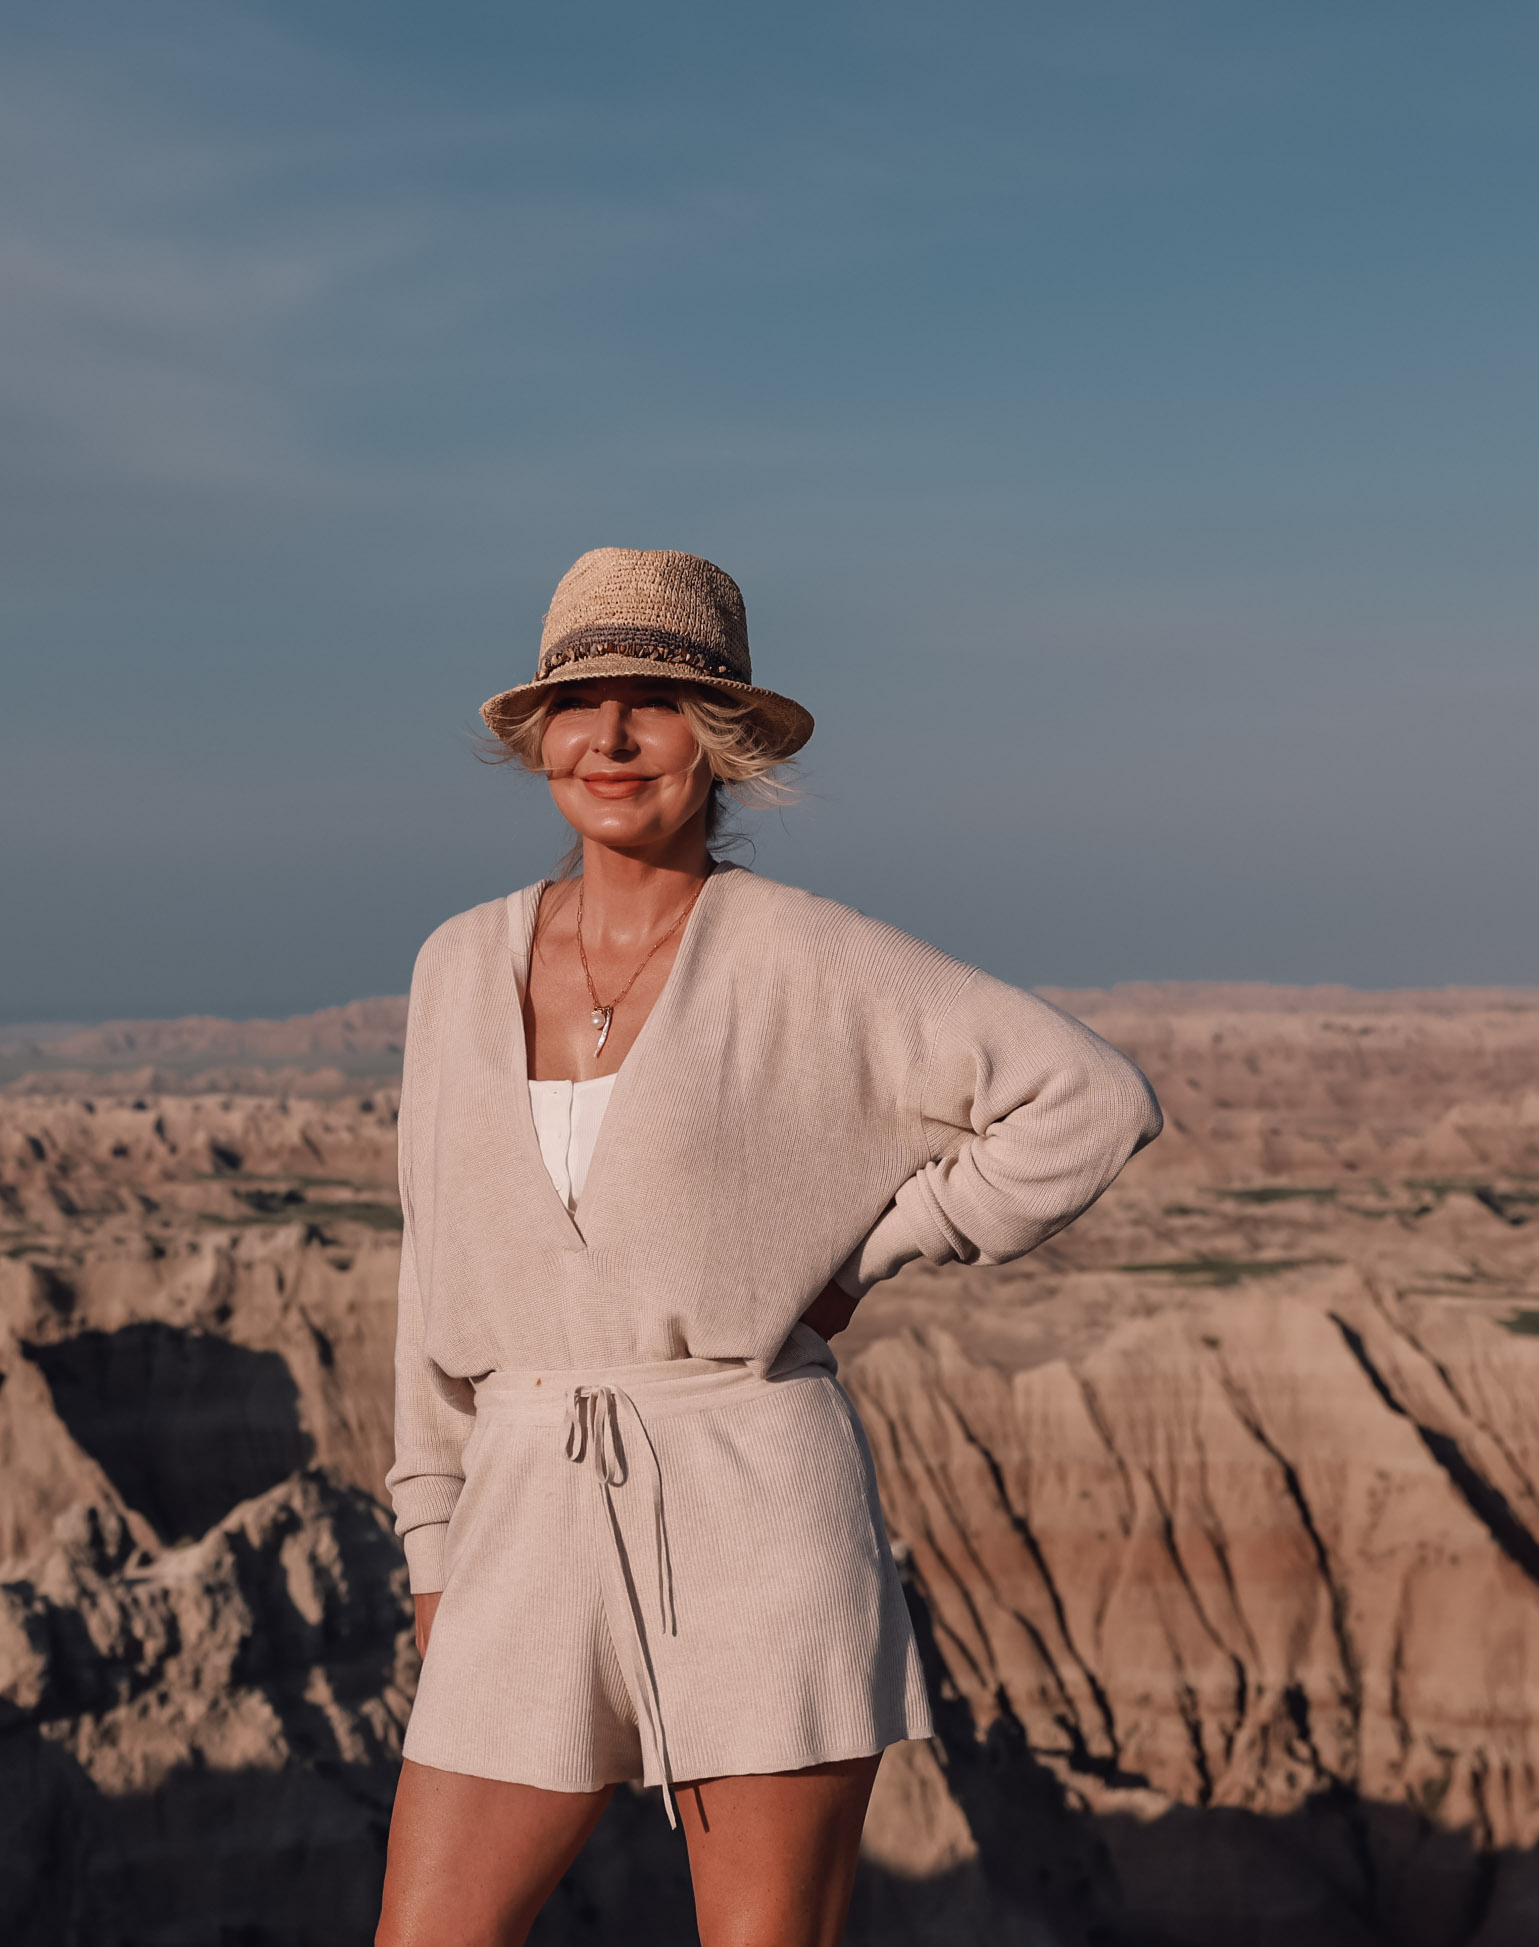 beige knit sweater and shorts set paired with packable straw fedora hat in Badlands National Park on fashion over 40 blogger Erin Busbee